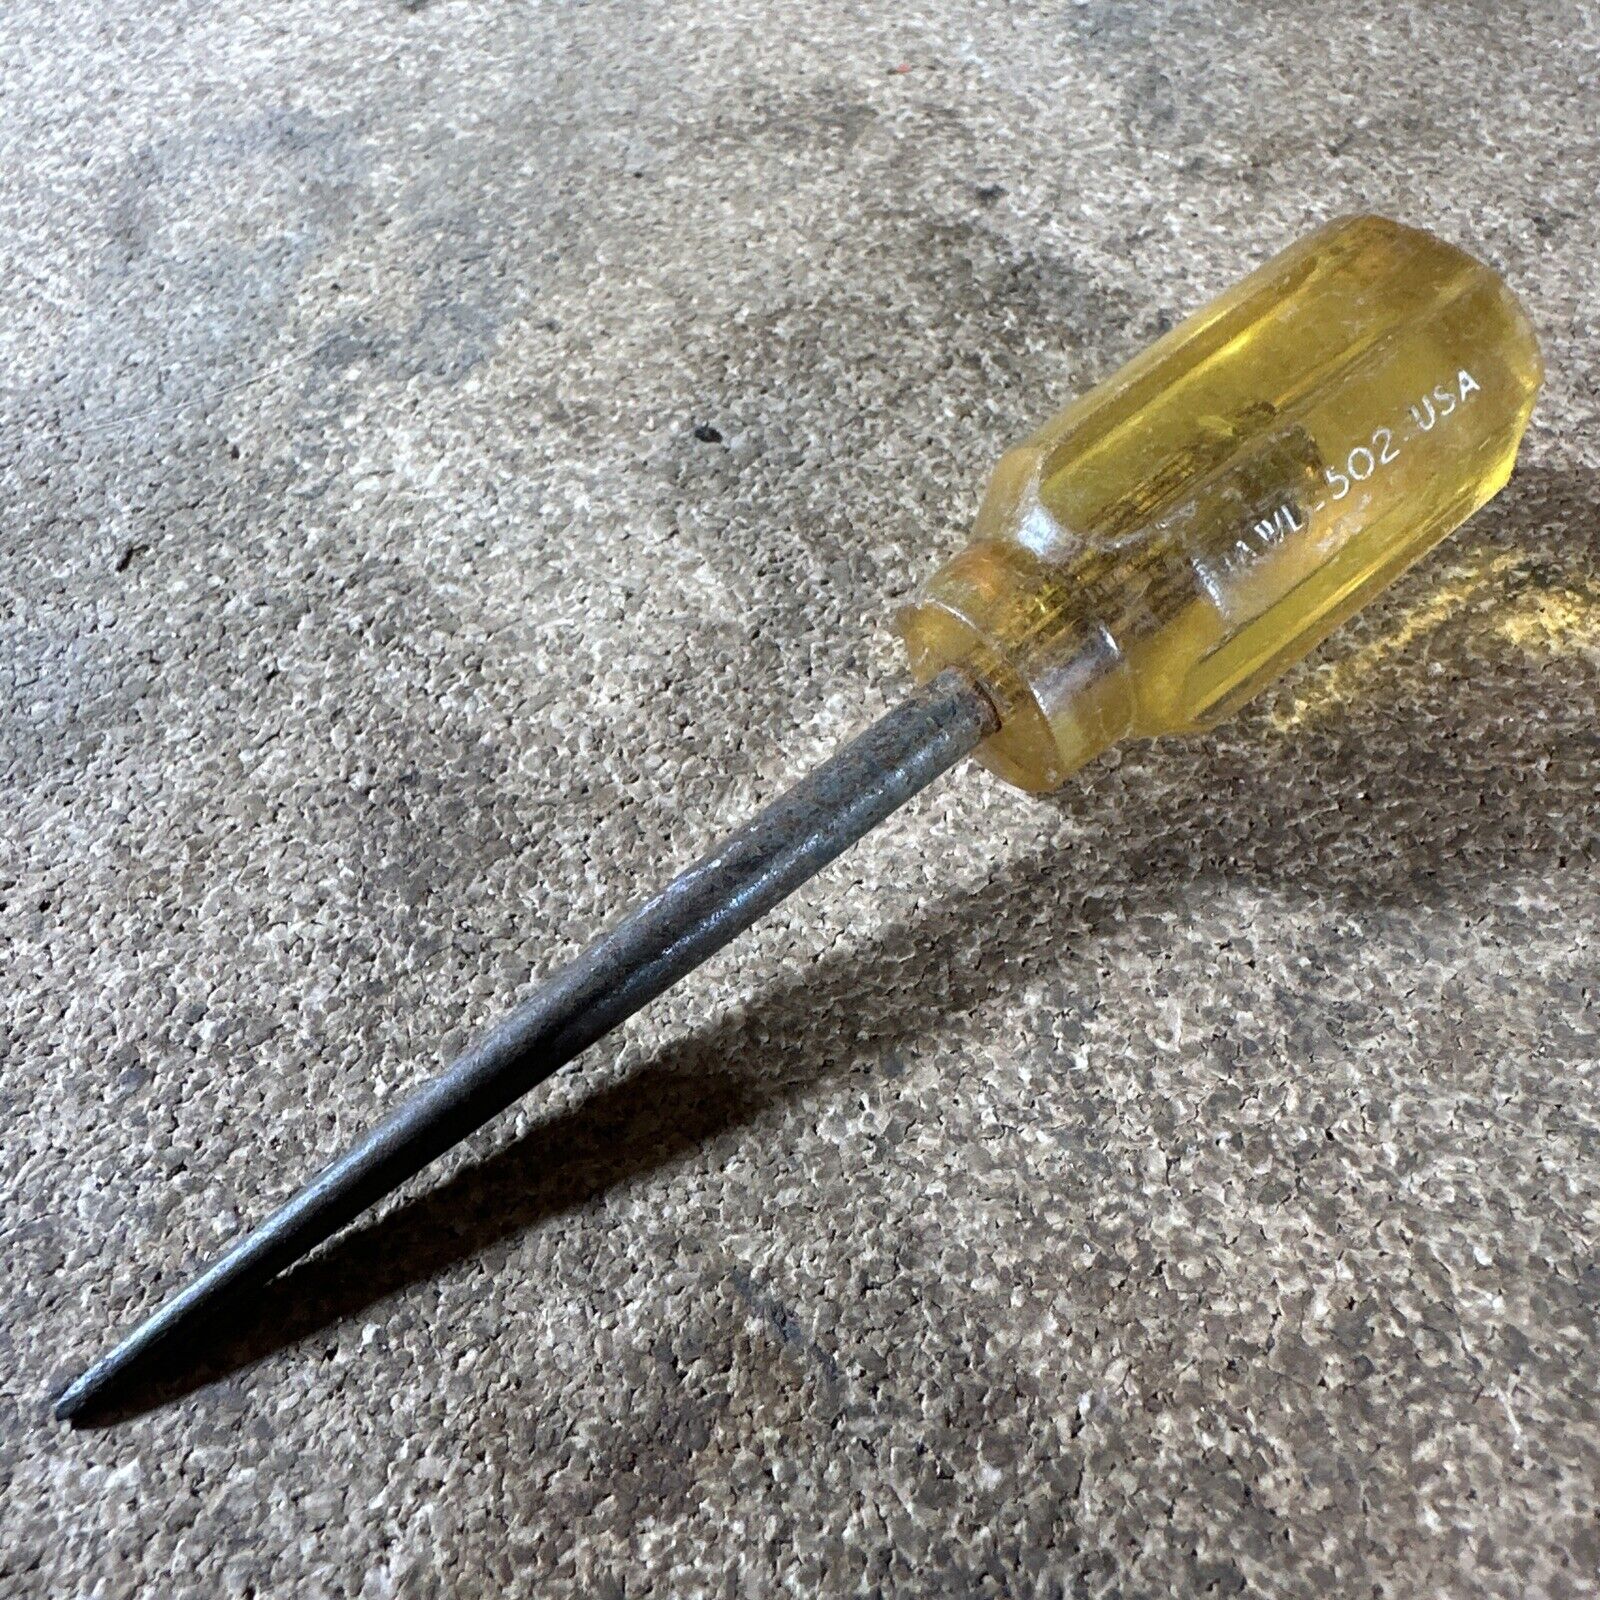 Vintage USA Made Tool Scratch Awl W/ Acetate Yellow Handle No. 502